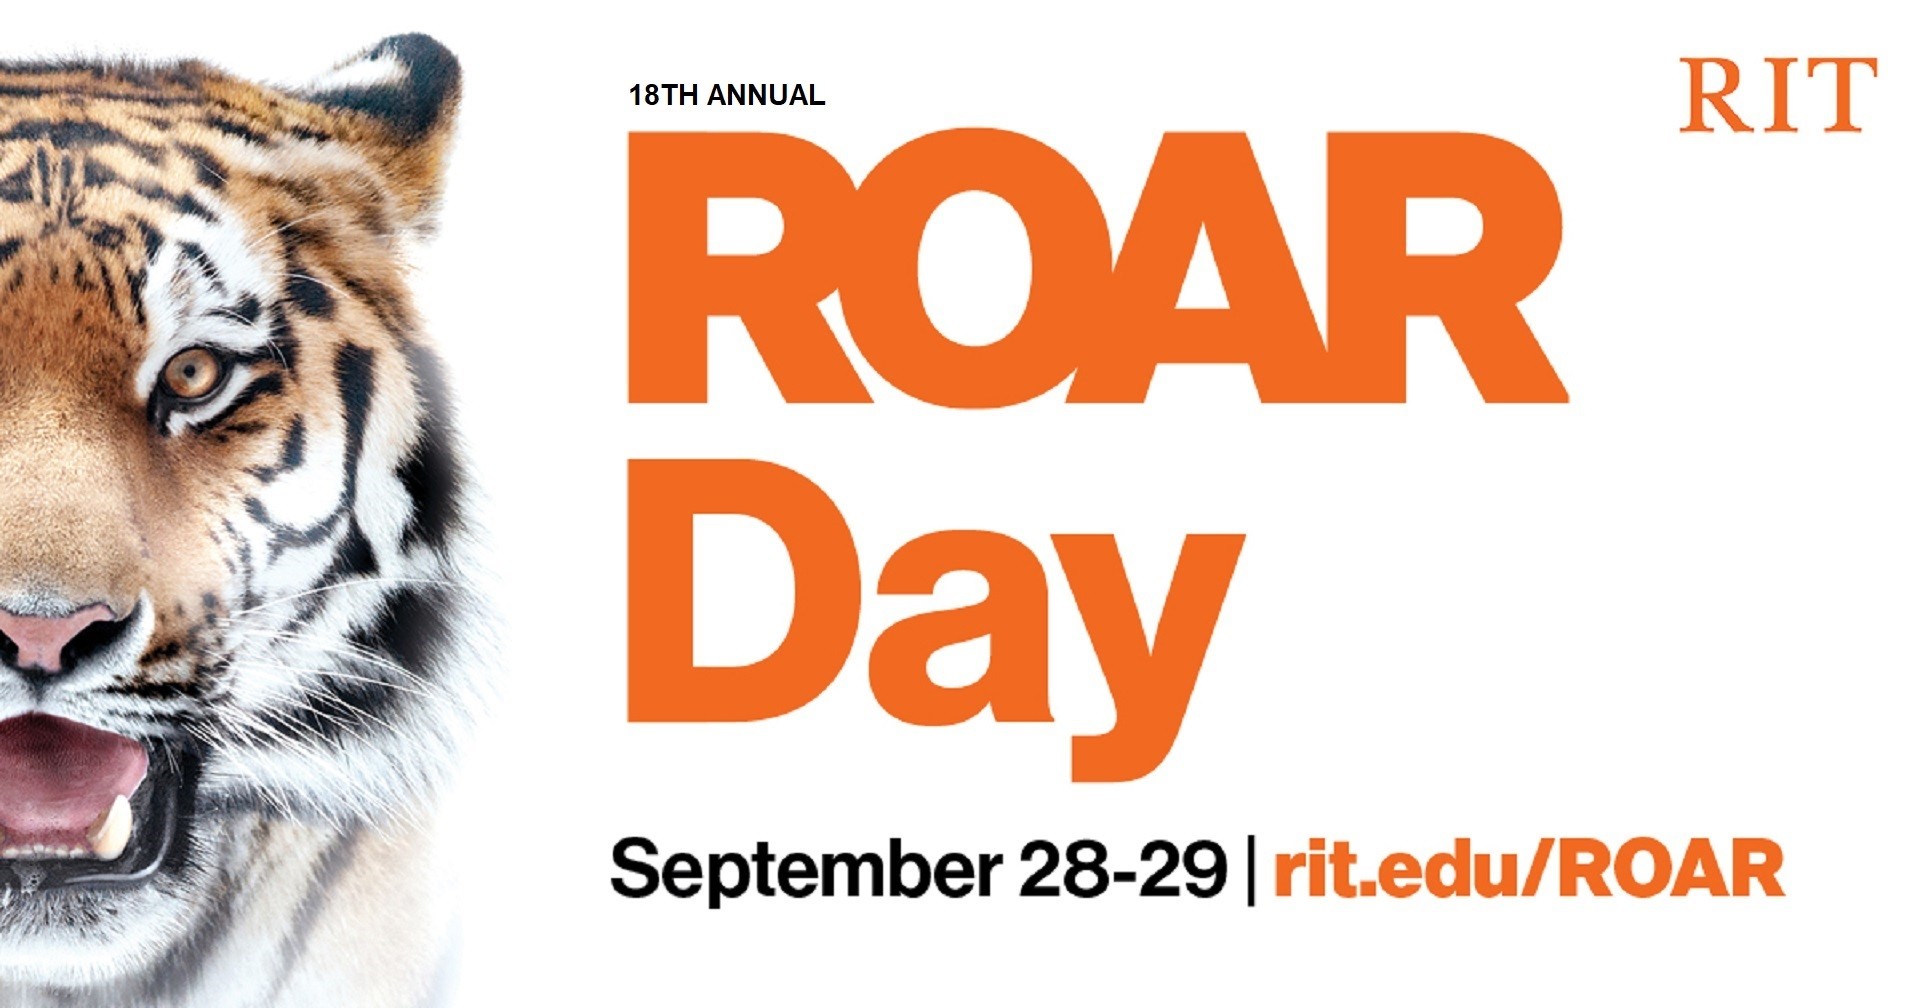 SHOW YOUR STRIPES AND ROAR FOR RIT!